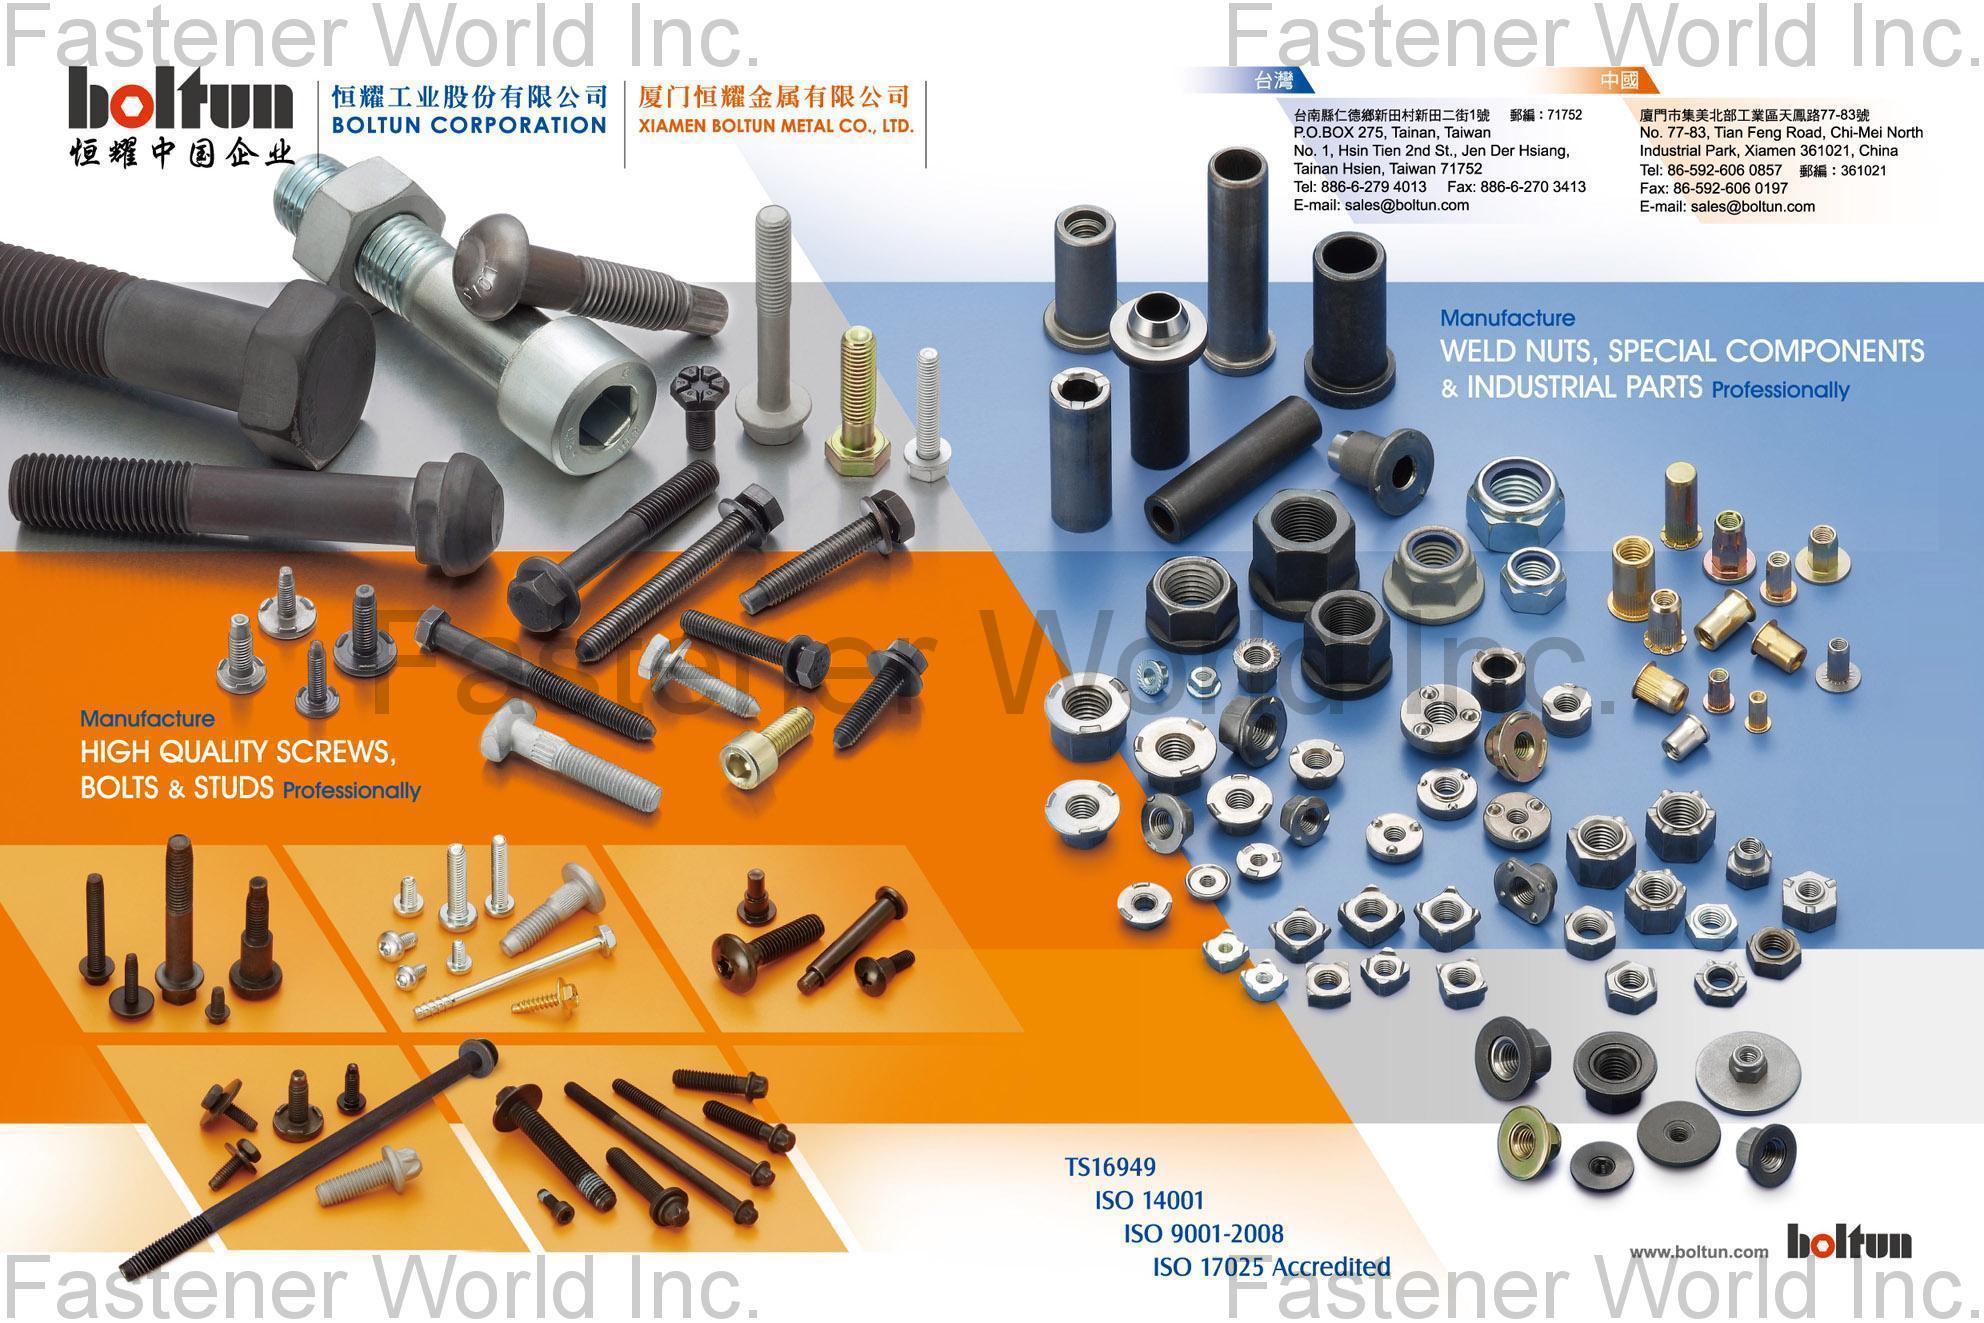 BOLTUN CORPORATION  , Welding Nuts,Rivet Nuts,Clinch Nuts,Locking Nuts,Nylon Insert Nuts,Conical Washer Nuts,T-Nuts,CNC Machining Parts,Stamping Parts,Bushed & Sleeves,Assembly Components,Special Parts,HEX. Bolt & Screw,Flange Bolt,Socket,Sems,Screw With Welding Projection,Screw With Welding Ring & Points,Clinch Bolt,T C Bolt,Special Pin,Wheel Bolt,Rail Bolt,Rail Bolts Construction Fasteners: Nuts, Screws & Washers,Wind Turbine Fasteners Kits: Nuts, Bolts & Washers Truck Wheel Bolts,Bolts & Nuts & Components,Motorcycle parts,Nylon rings & special washer,Expansion Bolt , All Kinds Of Nuts